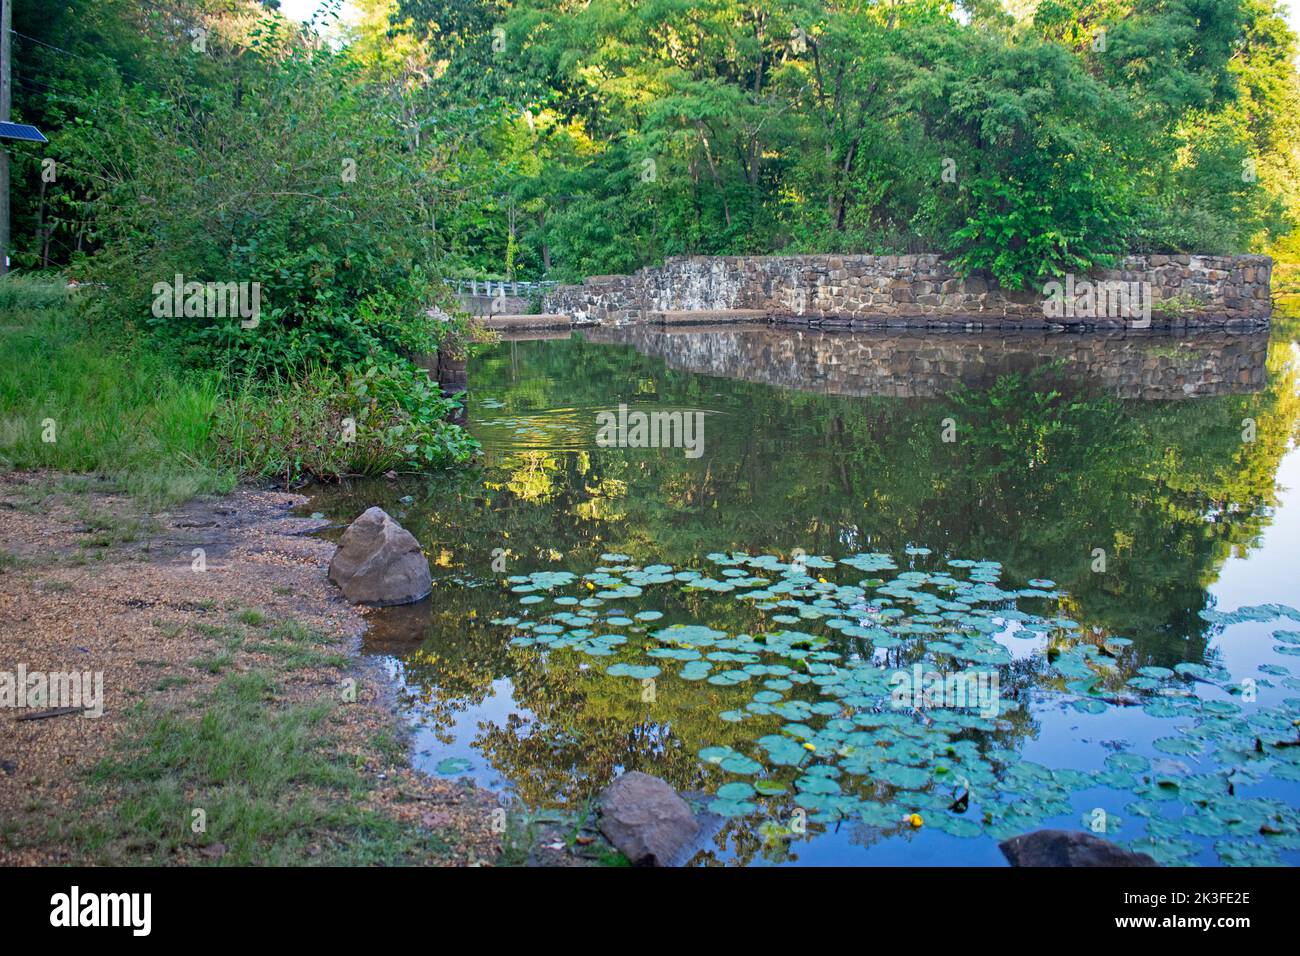 Reflections of trees and leaves in lake at Davidson's Mill Pond Park on a bright sunny day -16 Stock Photo